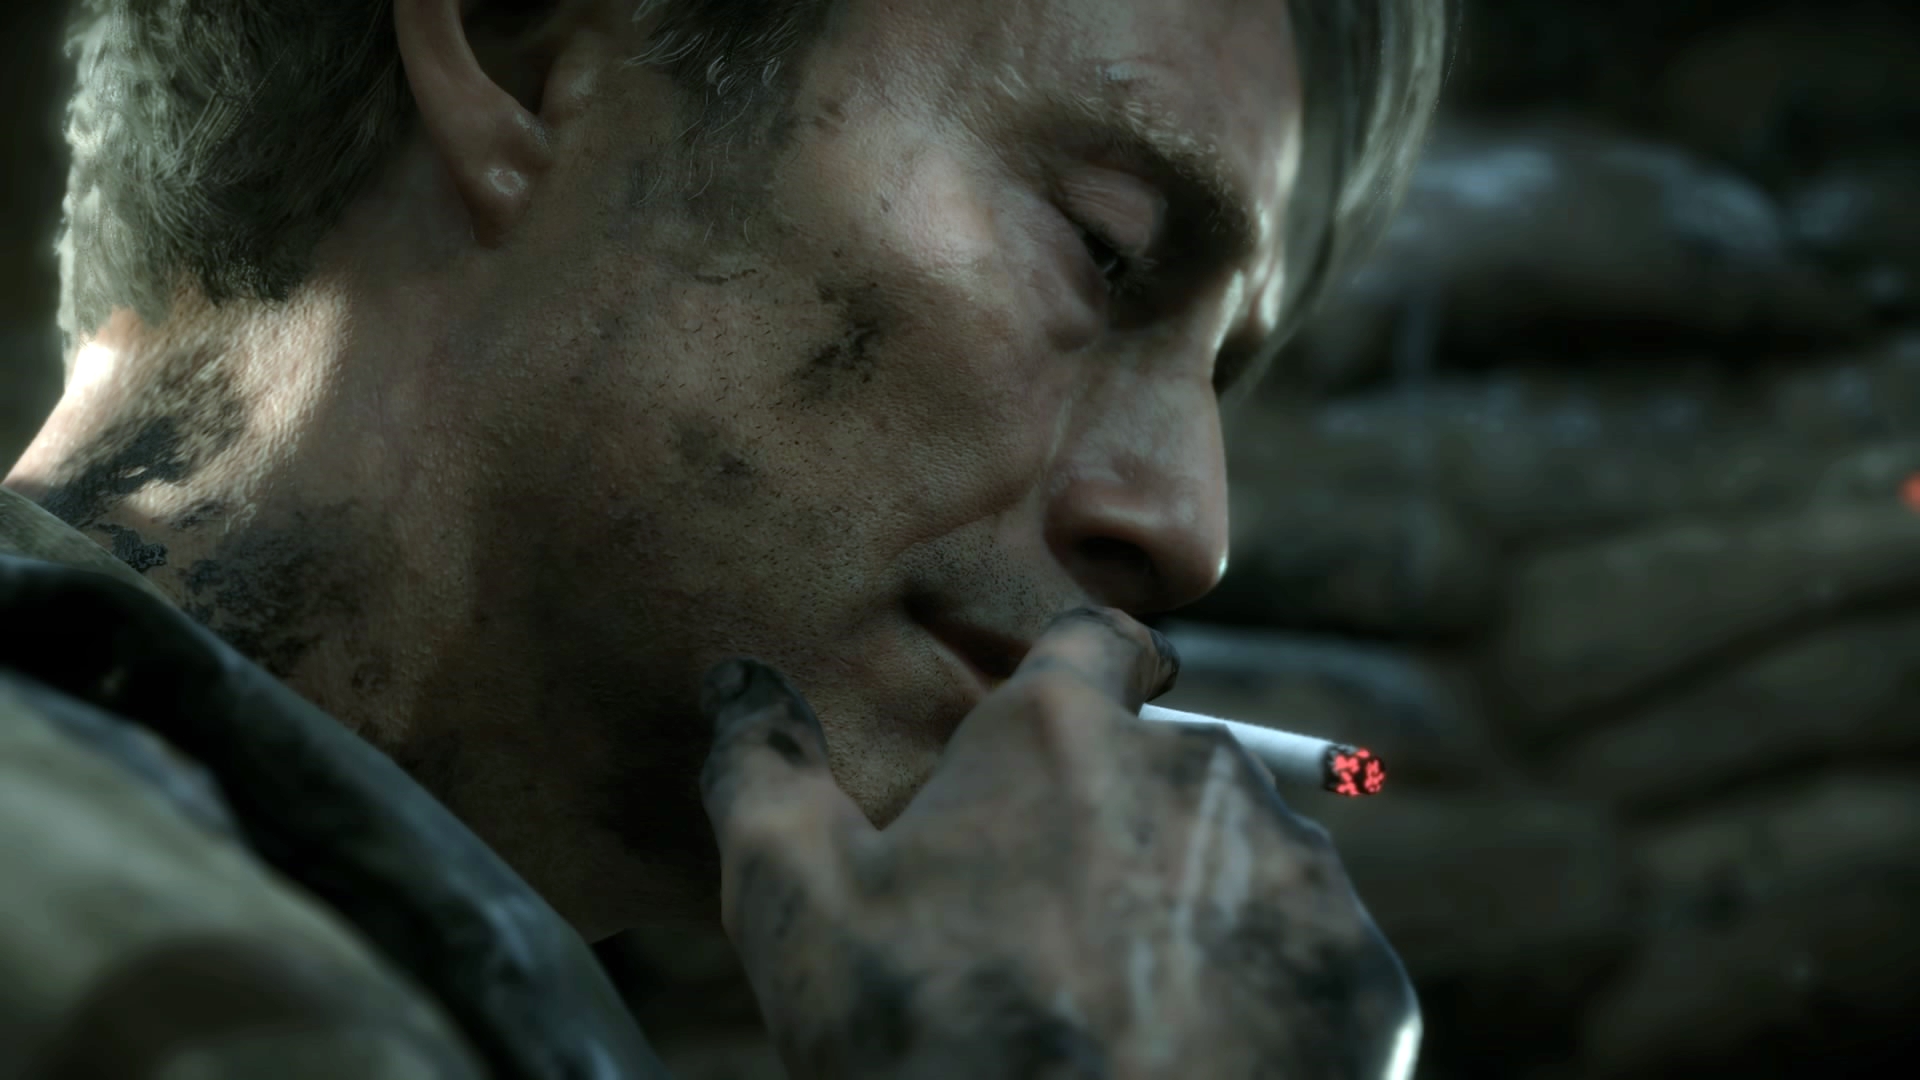 General 1920x1080 Death Stranding PlayStation Hideo Kojima screen shot video games video game characters Mads Mikkelsen actor